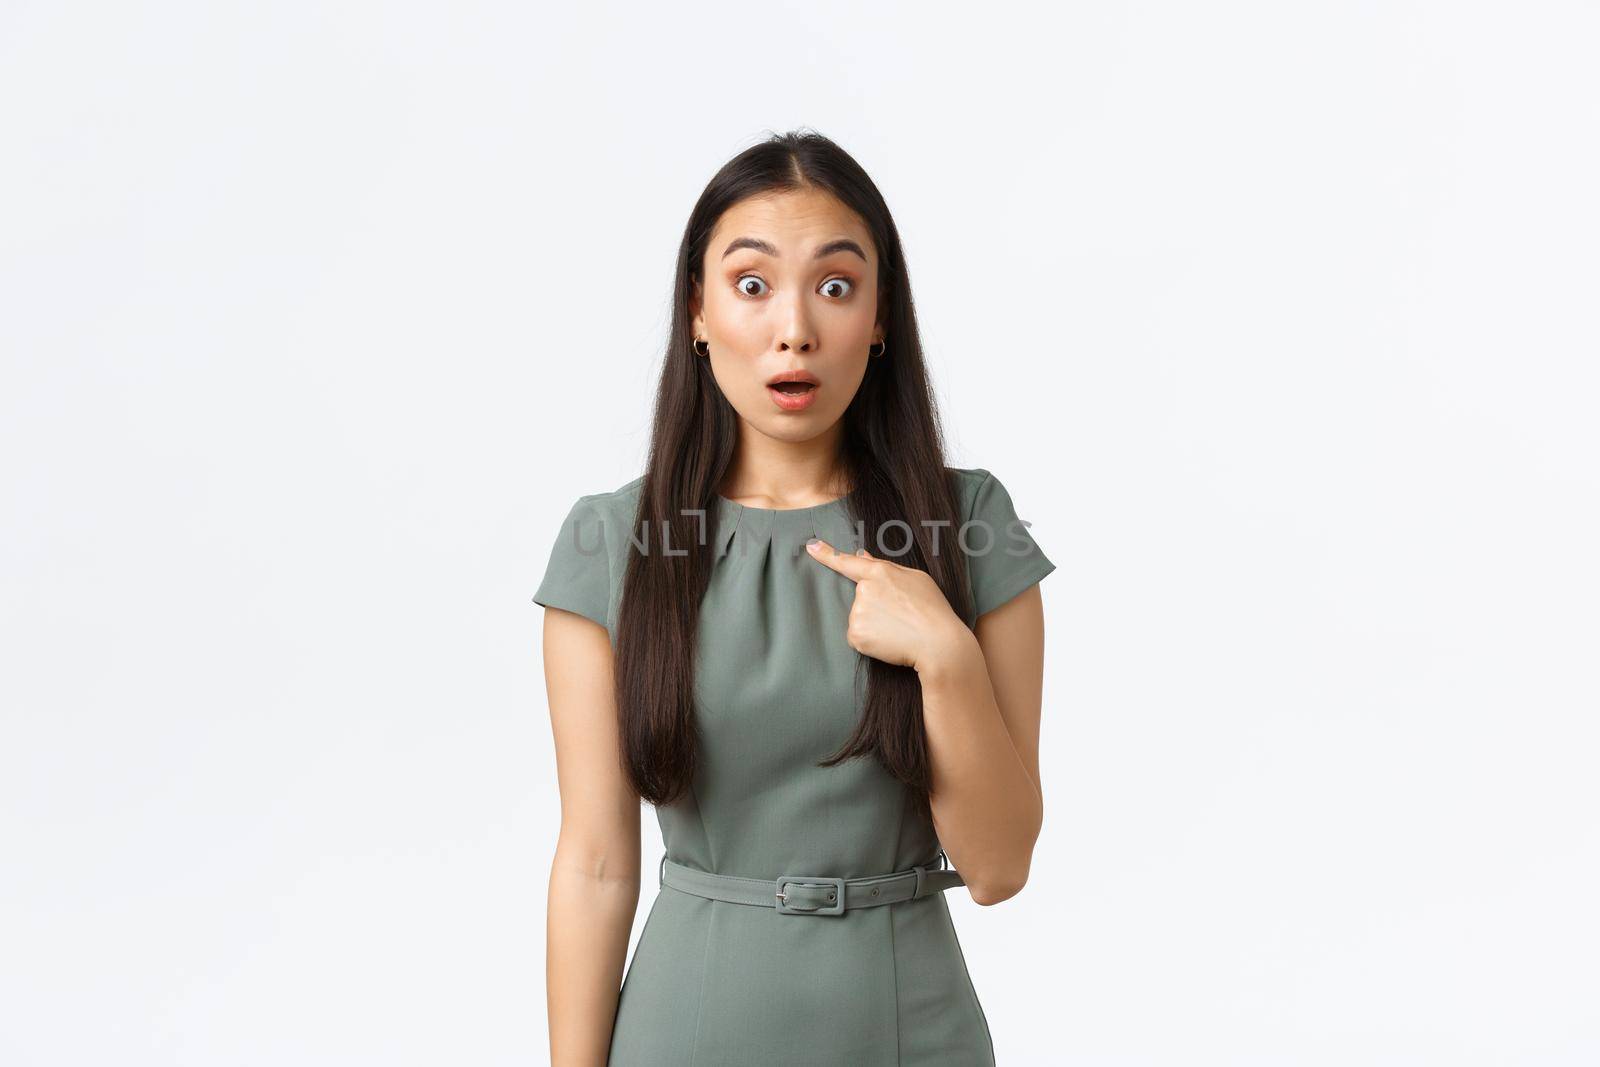 Small business owners, women entrepreneurs concept. Surprised and shocked asian woman in dress pointing at herself with startled face, being chosen or picked, standing white background speechless.